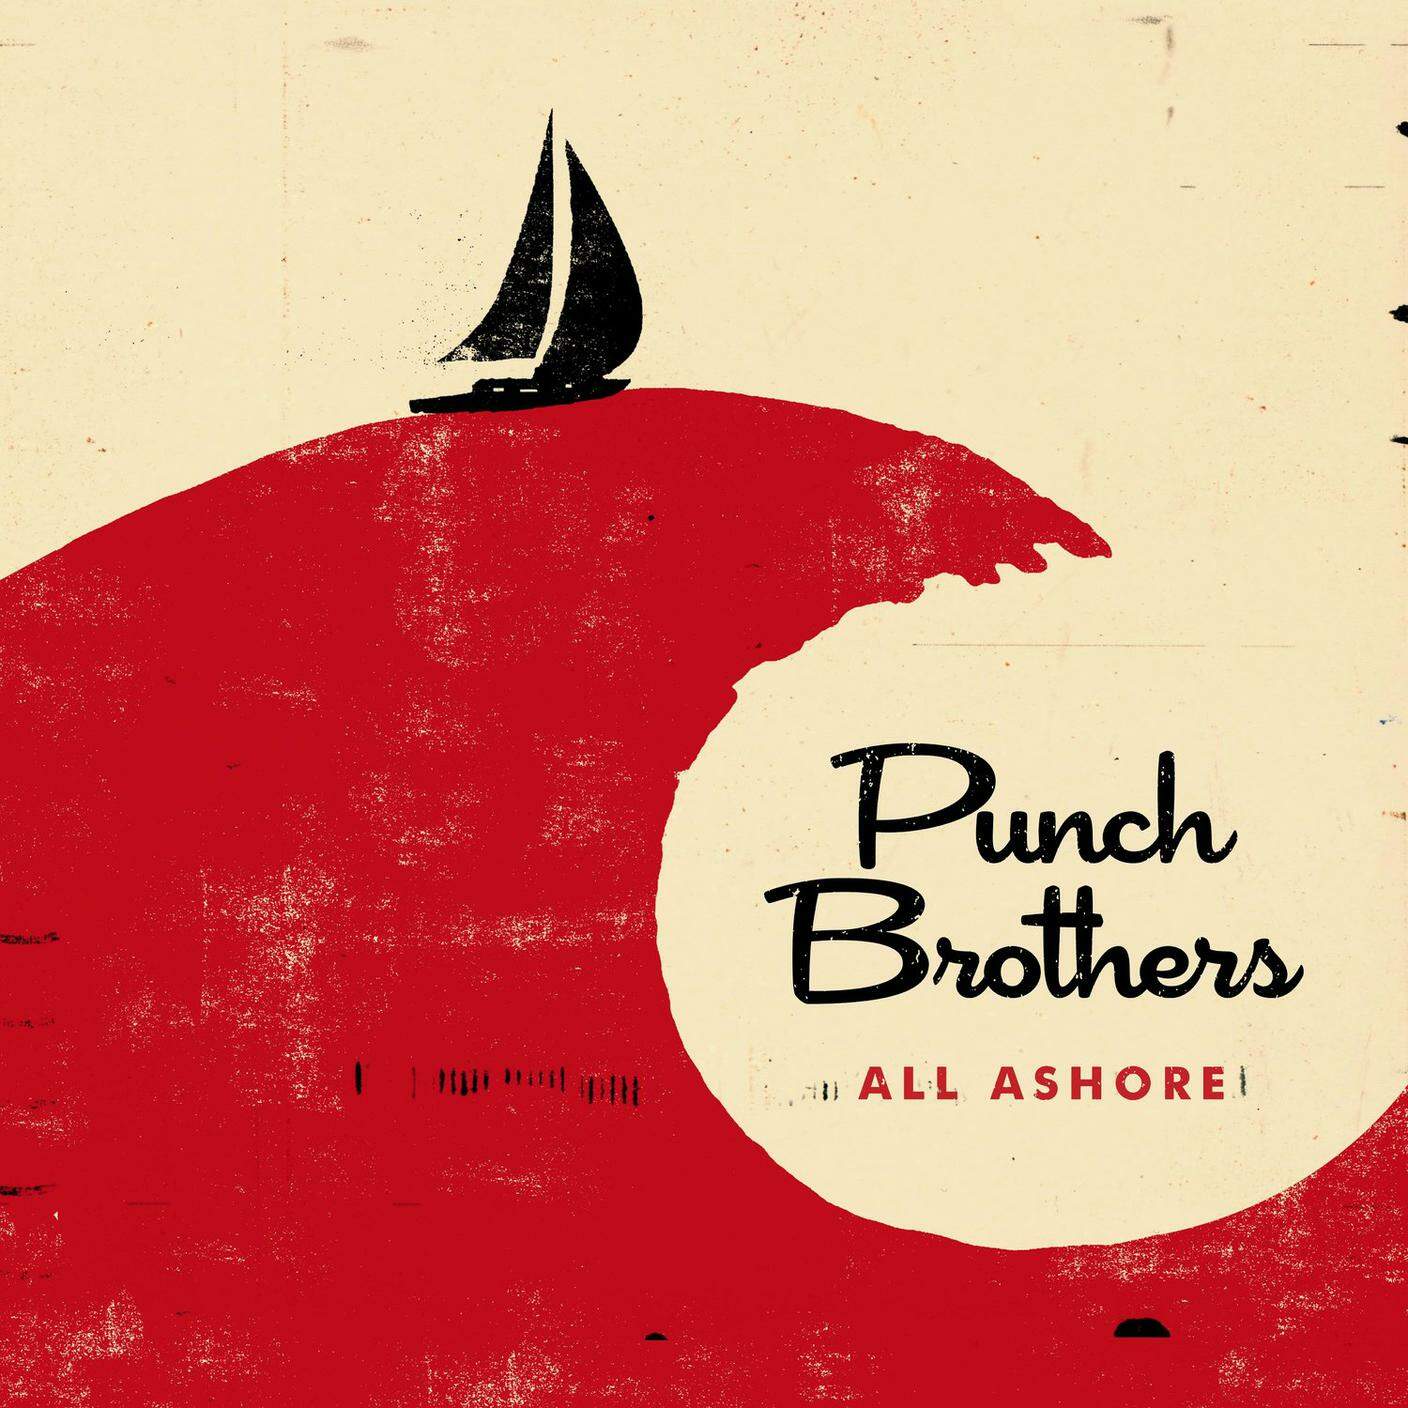 Punch Brothers; "It's All Part of the Plan"; Nonesuch (dettaglio copertina)